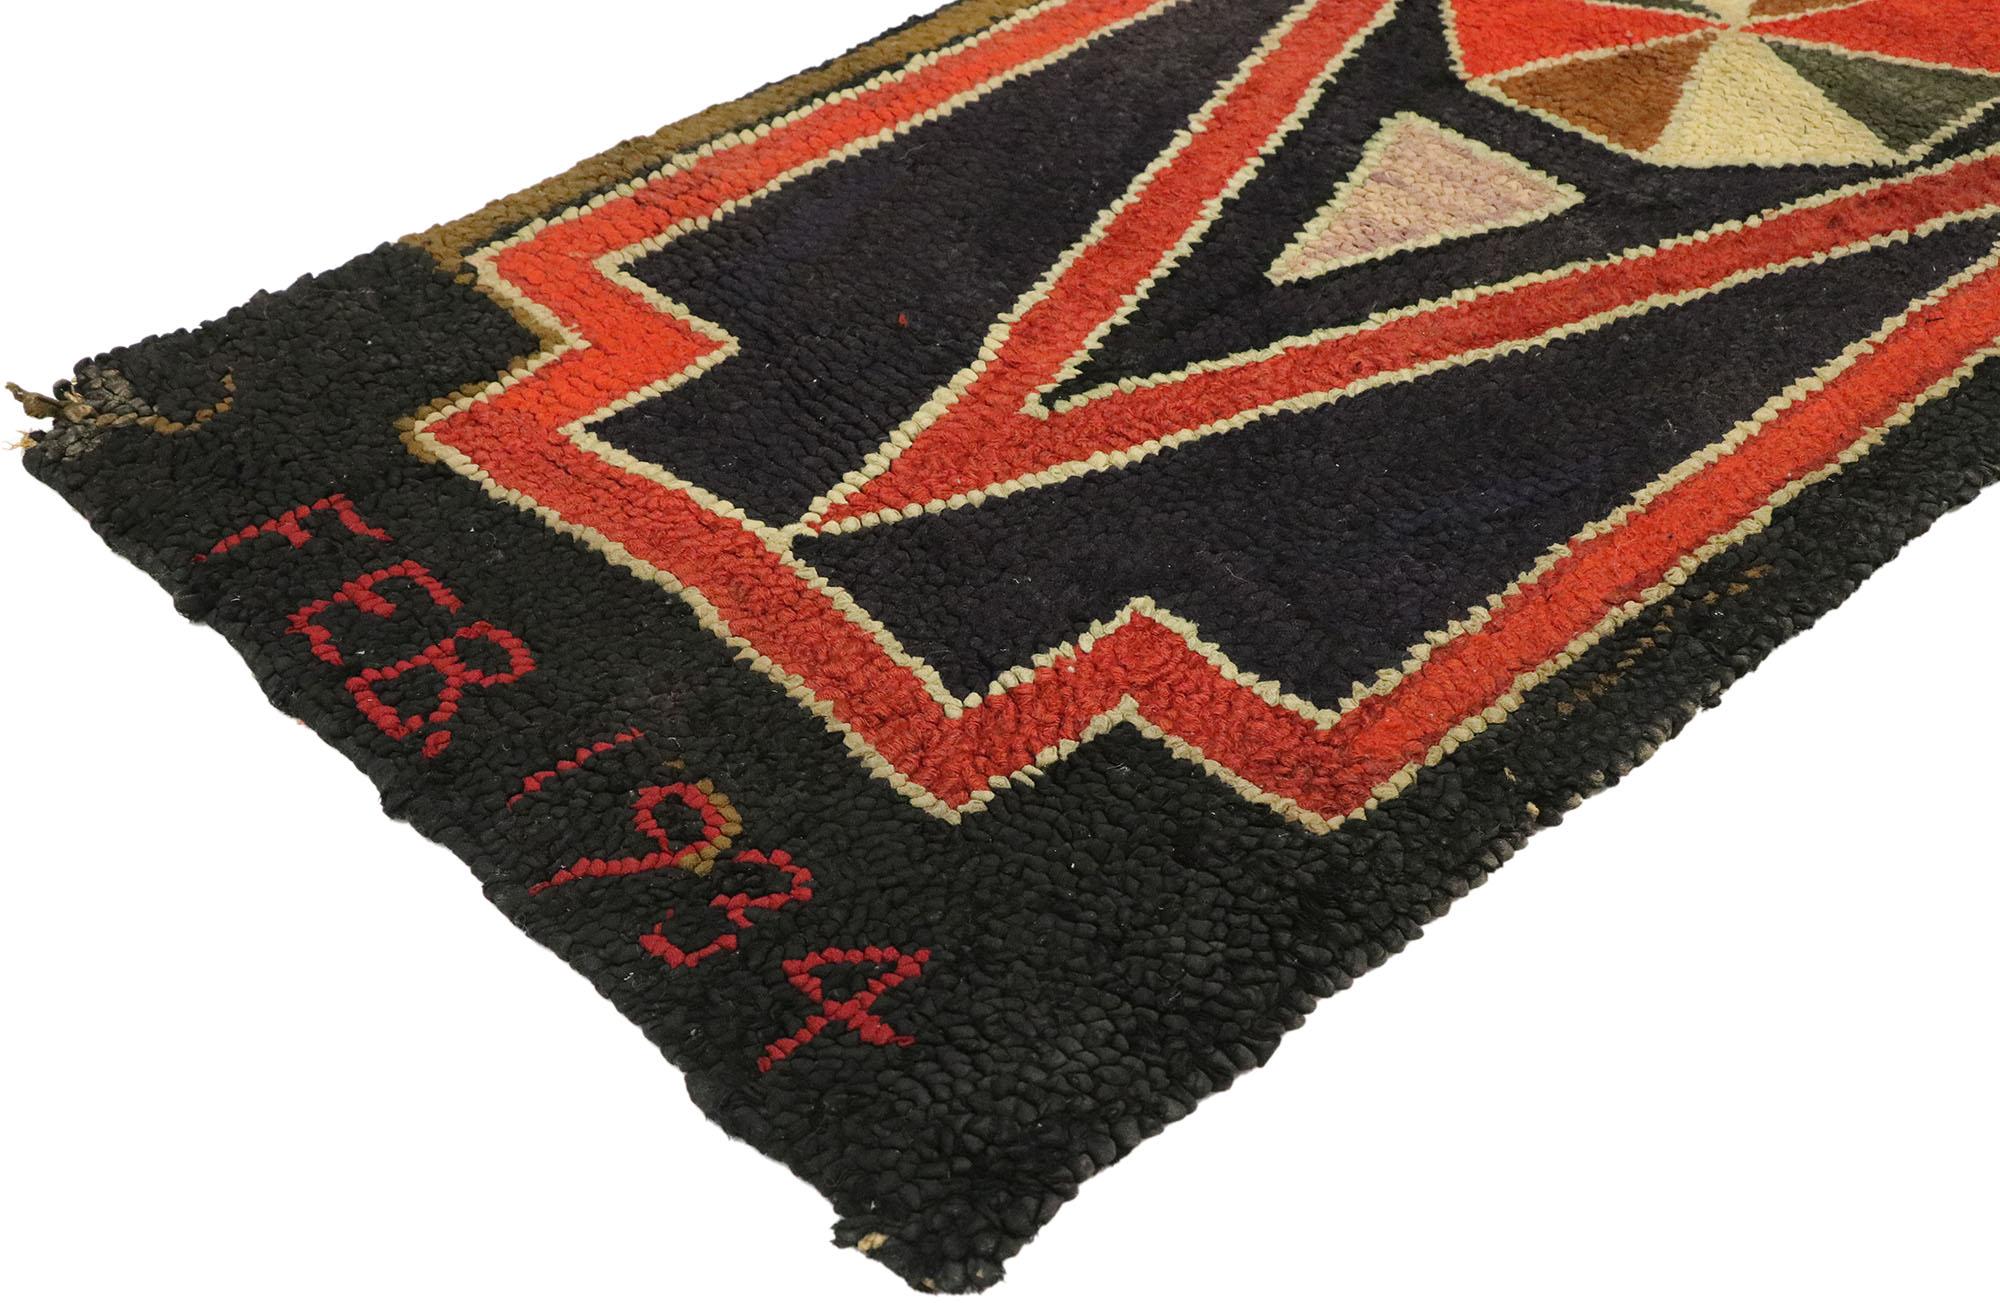 77502, distressed antique American Hooked rug with Midcentury Folk Art style. With its bold expressive design and lovingly time-worn composition, this distressed antique hooked rug is a captivating vision of woven beauty. The weathered field